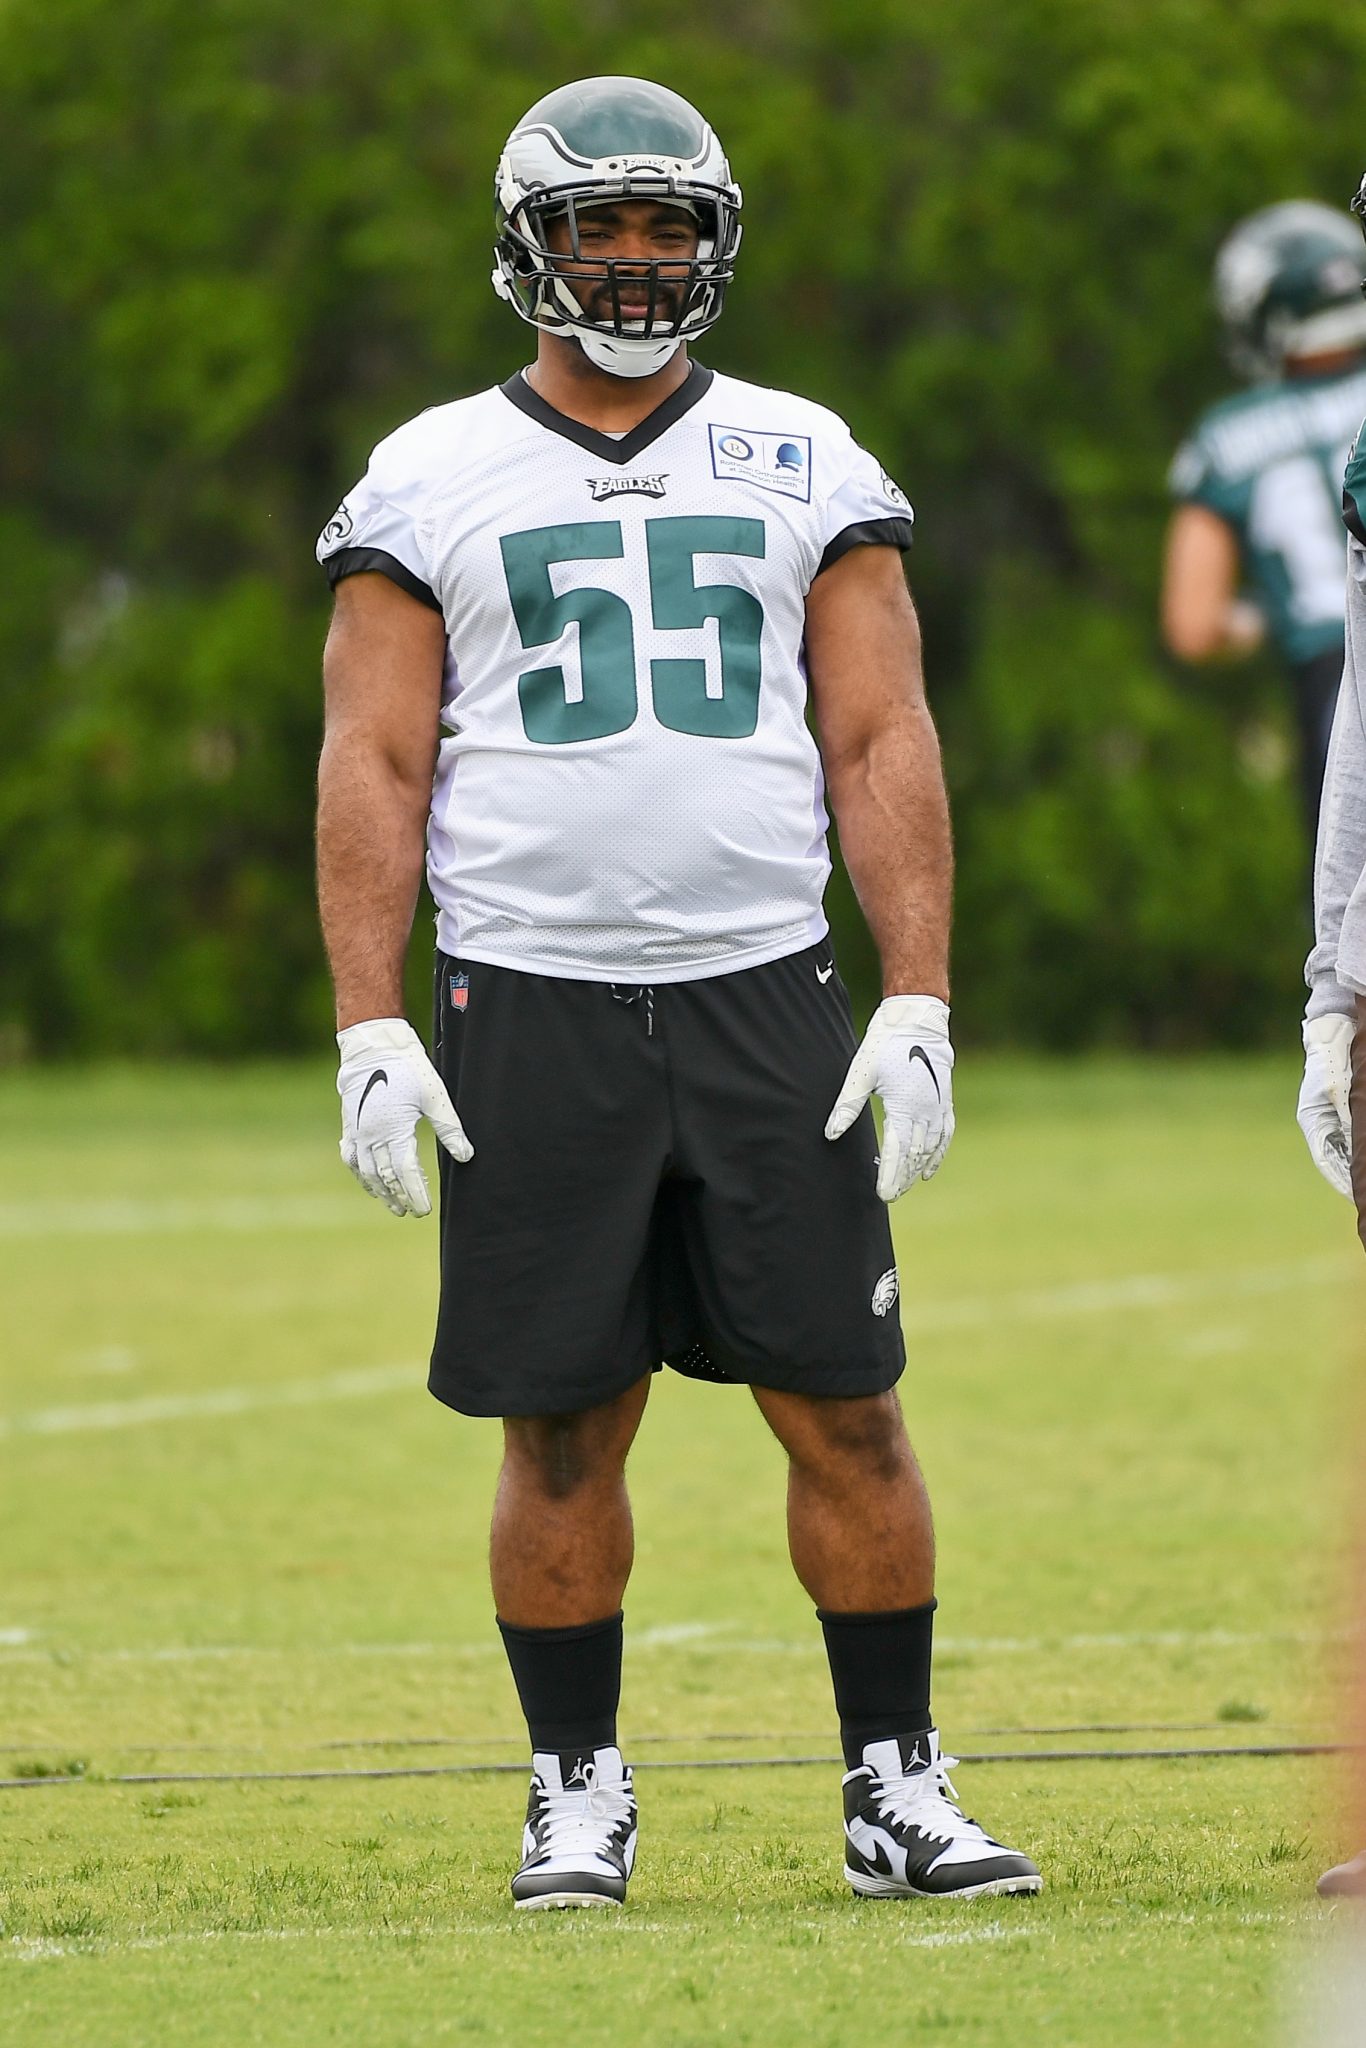 Eagles will be put on the defensive this offseason